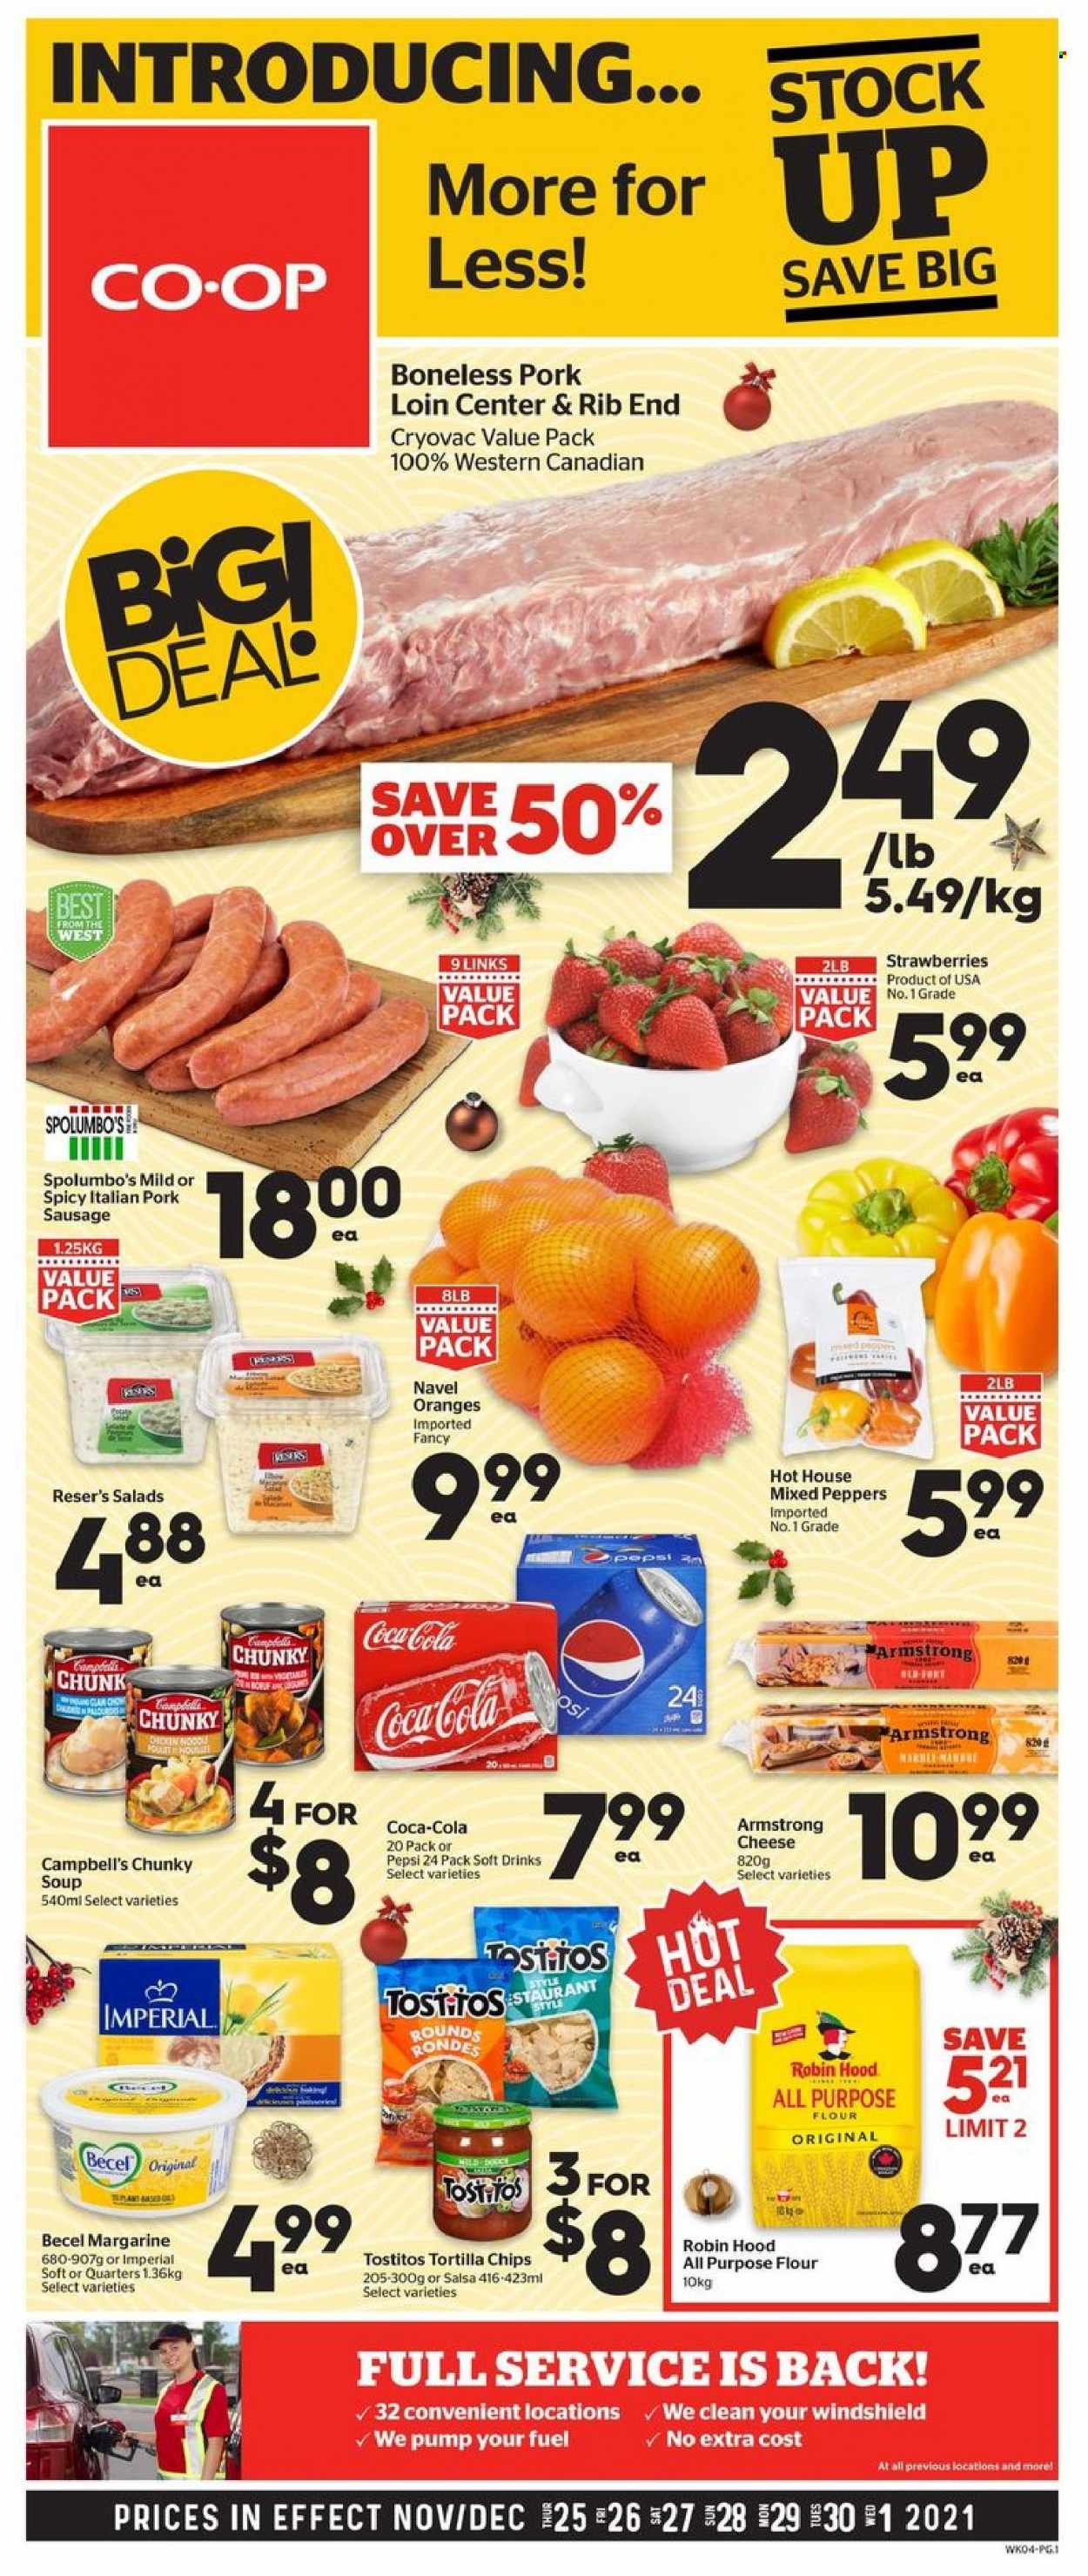 thumbnail - Calgary Co-op Flyer - November 25, 2021 - December 01, 2021 - Sales products - peppers, strawberries, navel oranges, Campbell's, soup, sausage, pork sausage, cheese, margarine, tortilla chips, Tostitos, all purpose flour, salsa, Coca-Cola, Pepsi, soft drink, pork loin, pork meat, chips, oranges. Page 1.